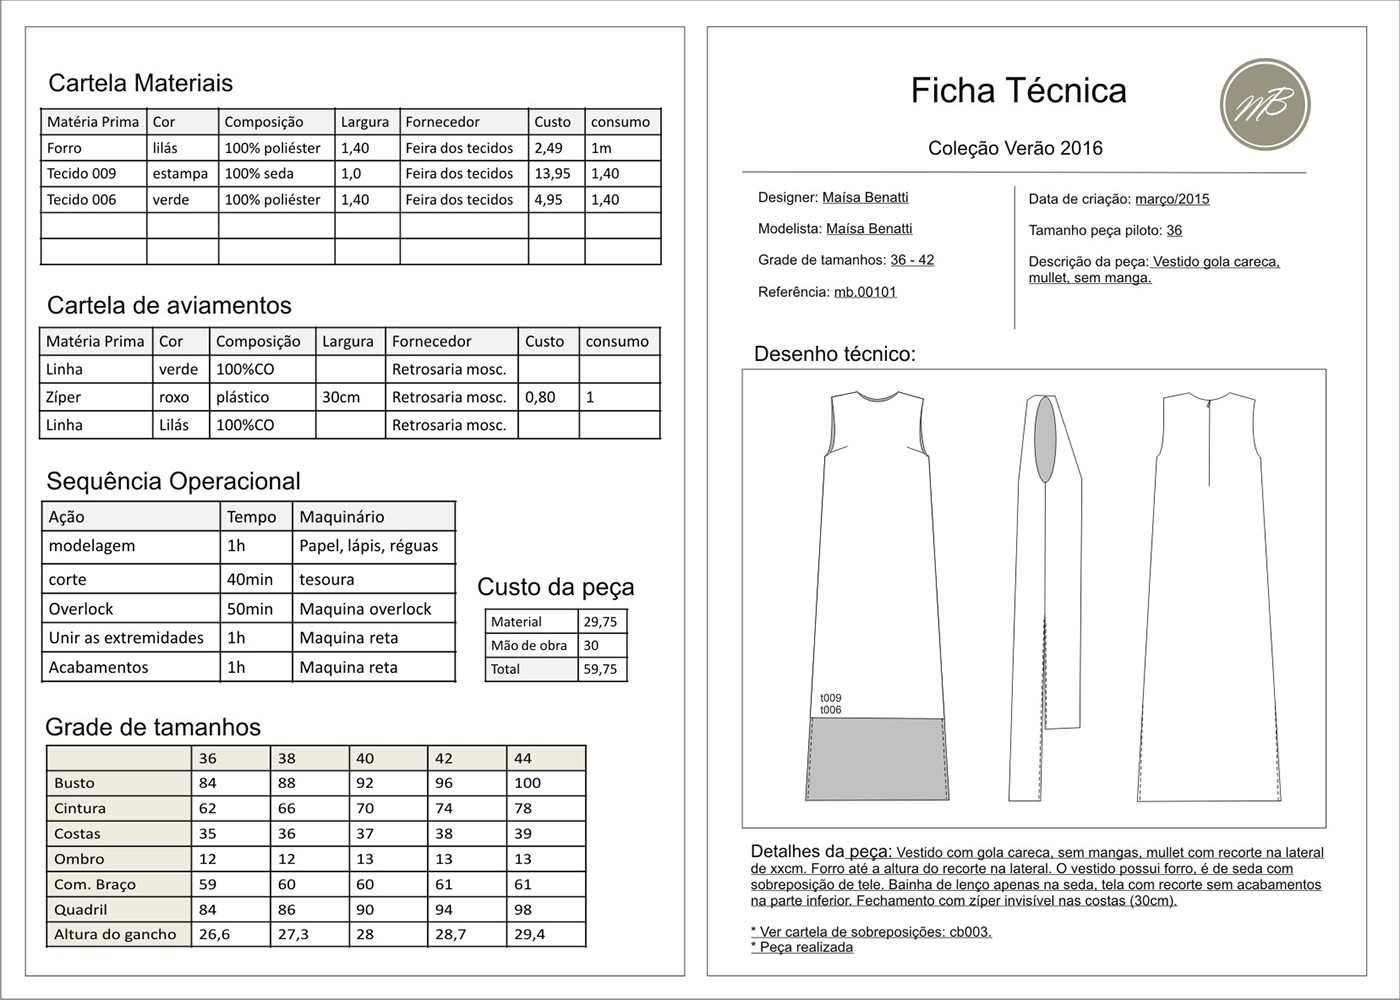 technical sheets